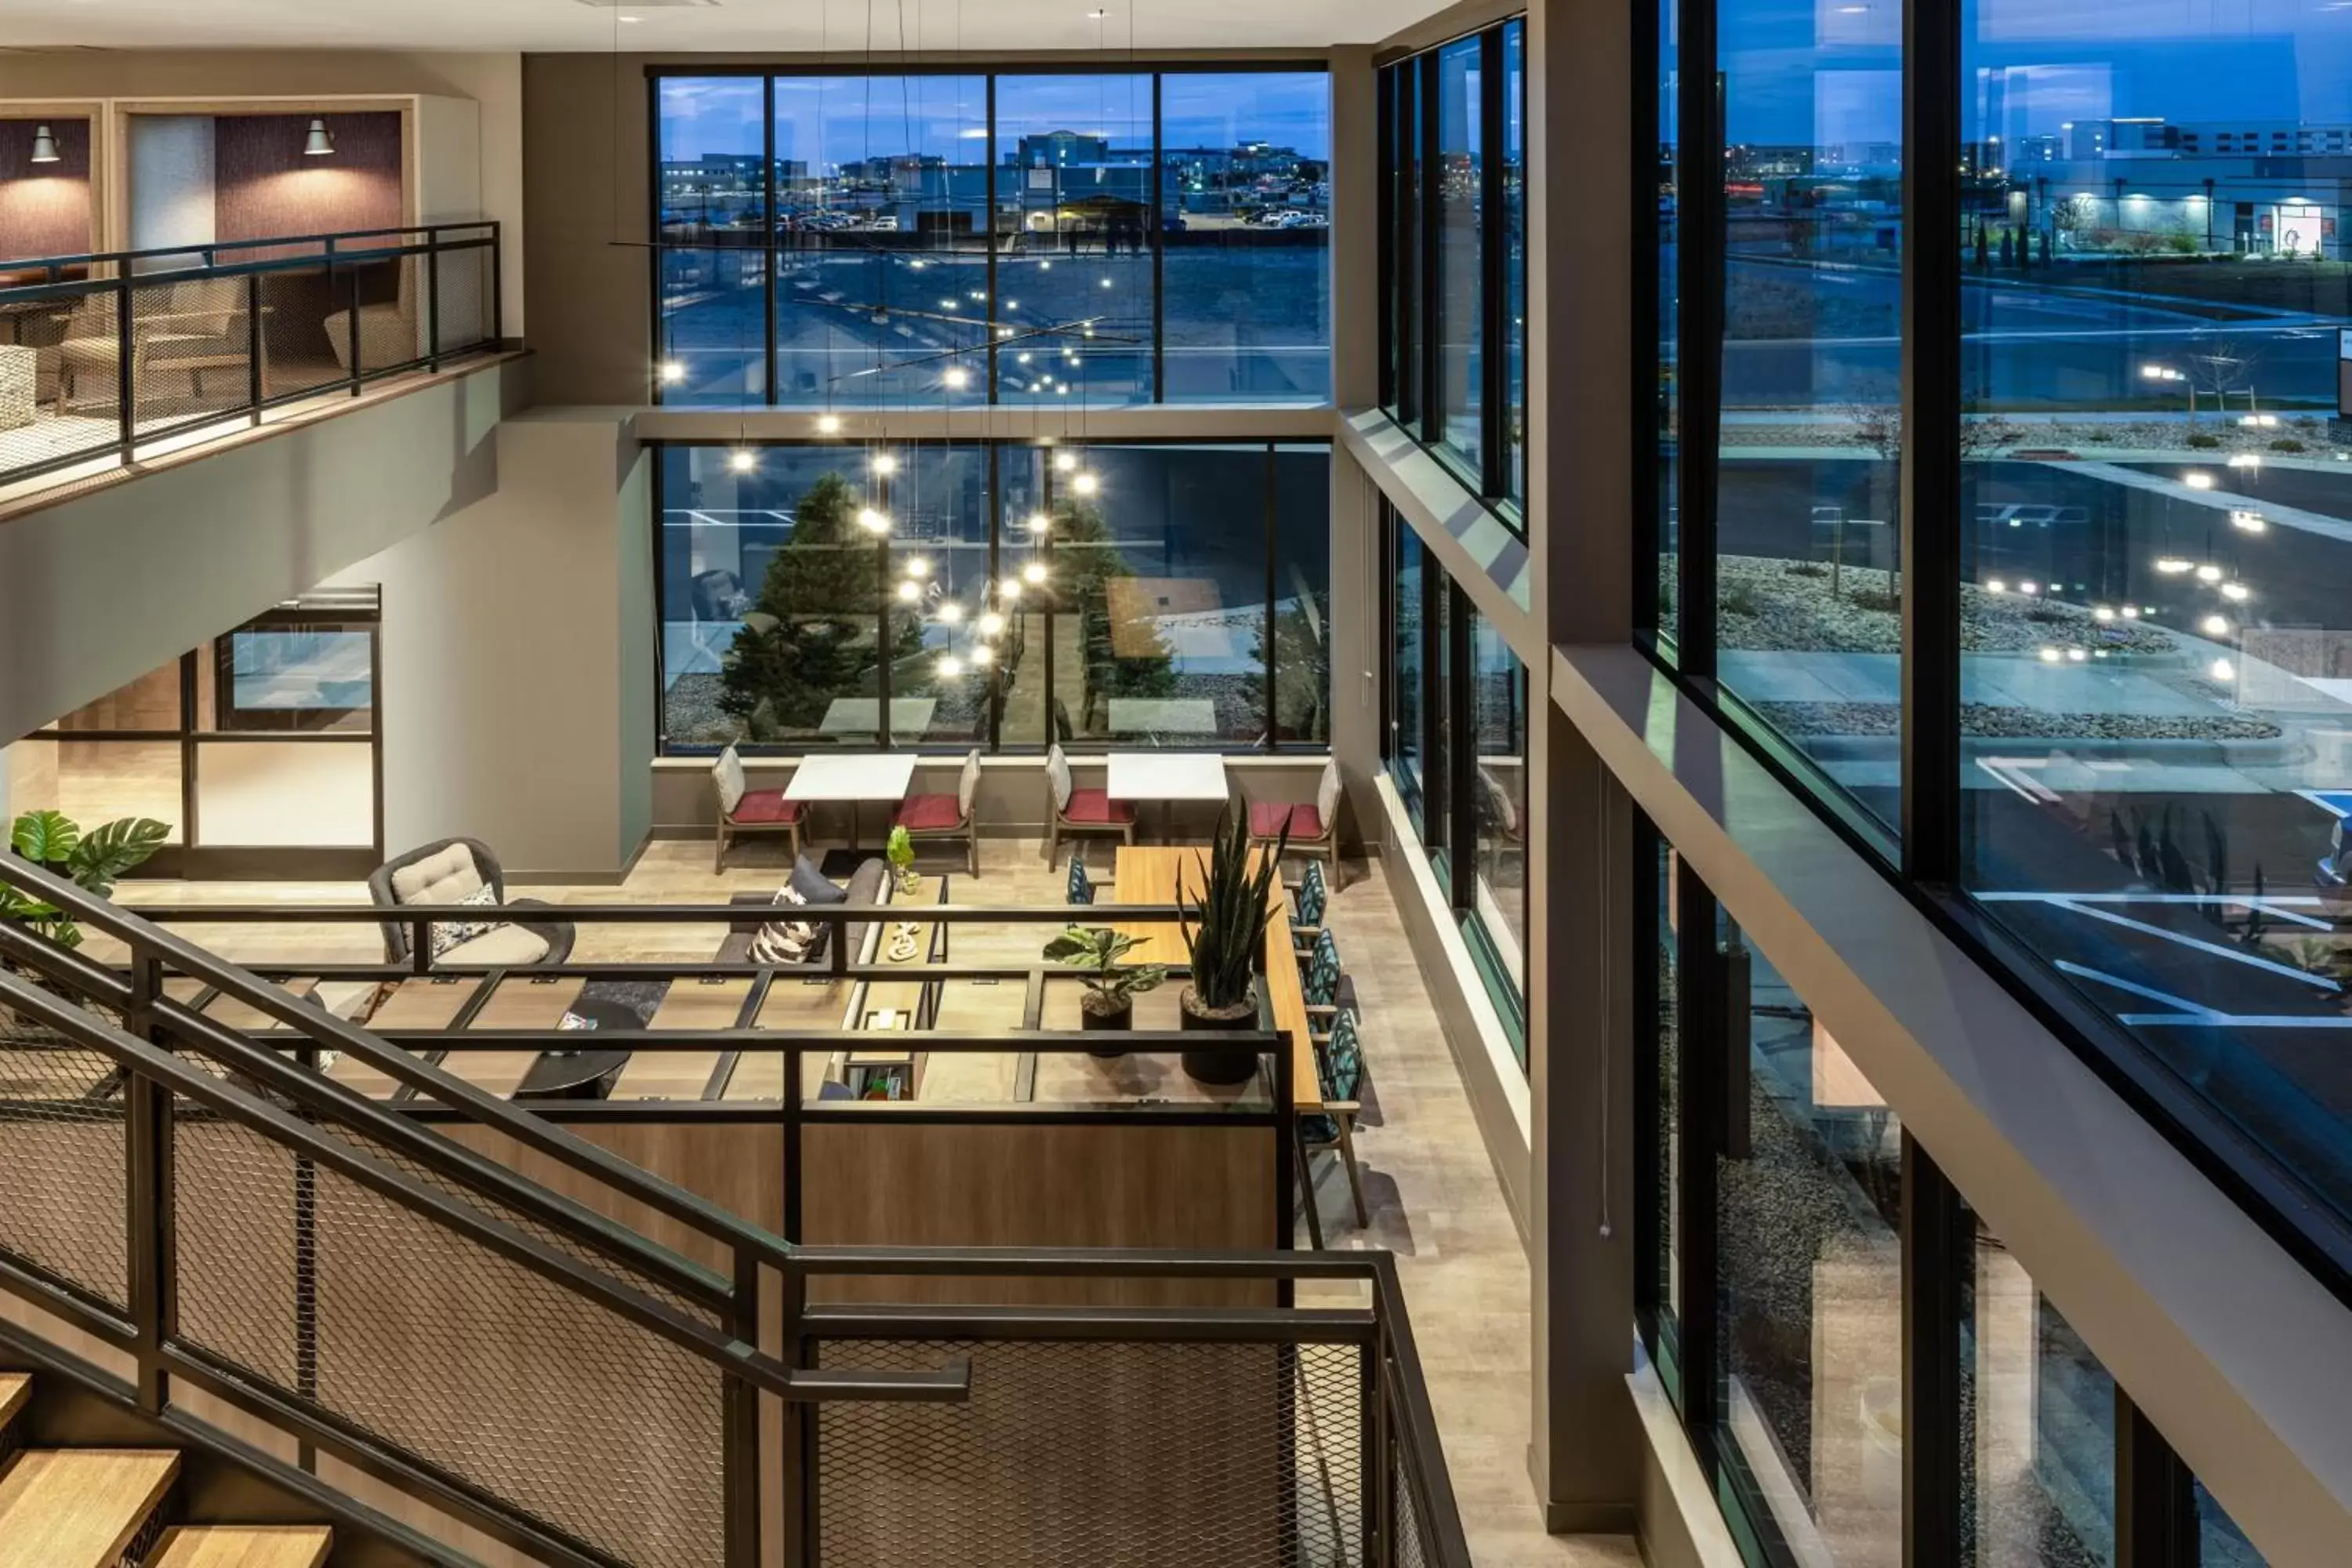 Property building, Balcony/Terrace in Atwell Suites - DENVER AIRPORT TOWER ROAD, an IHG Hotel